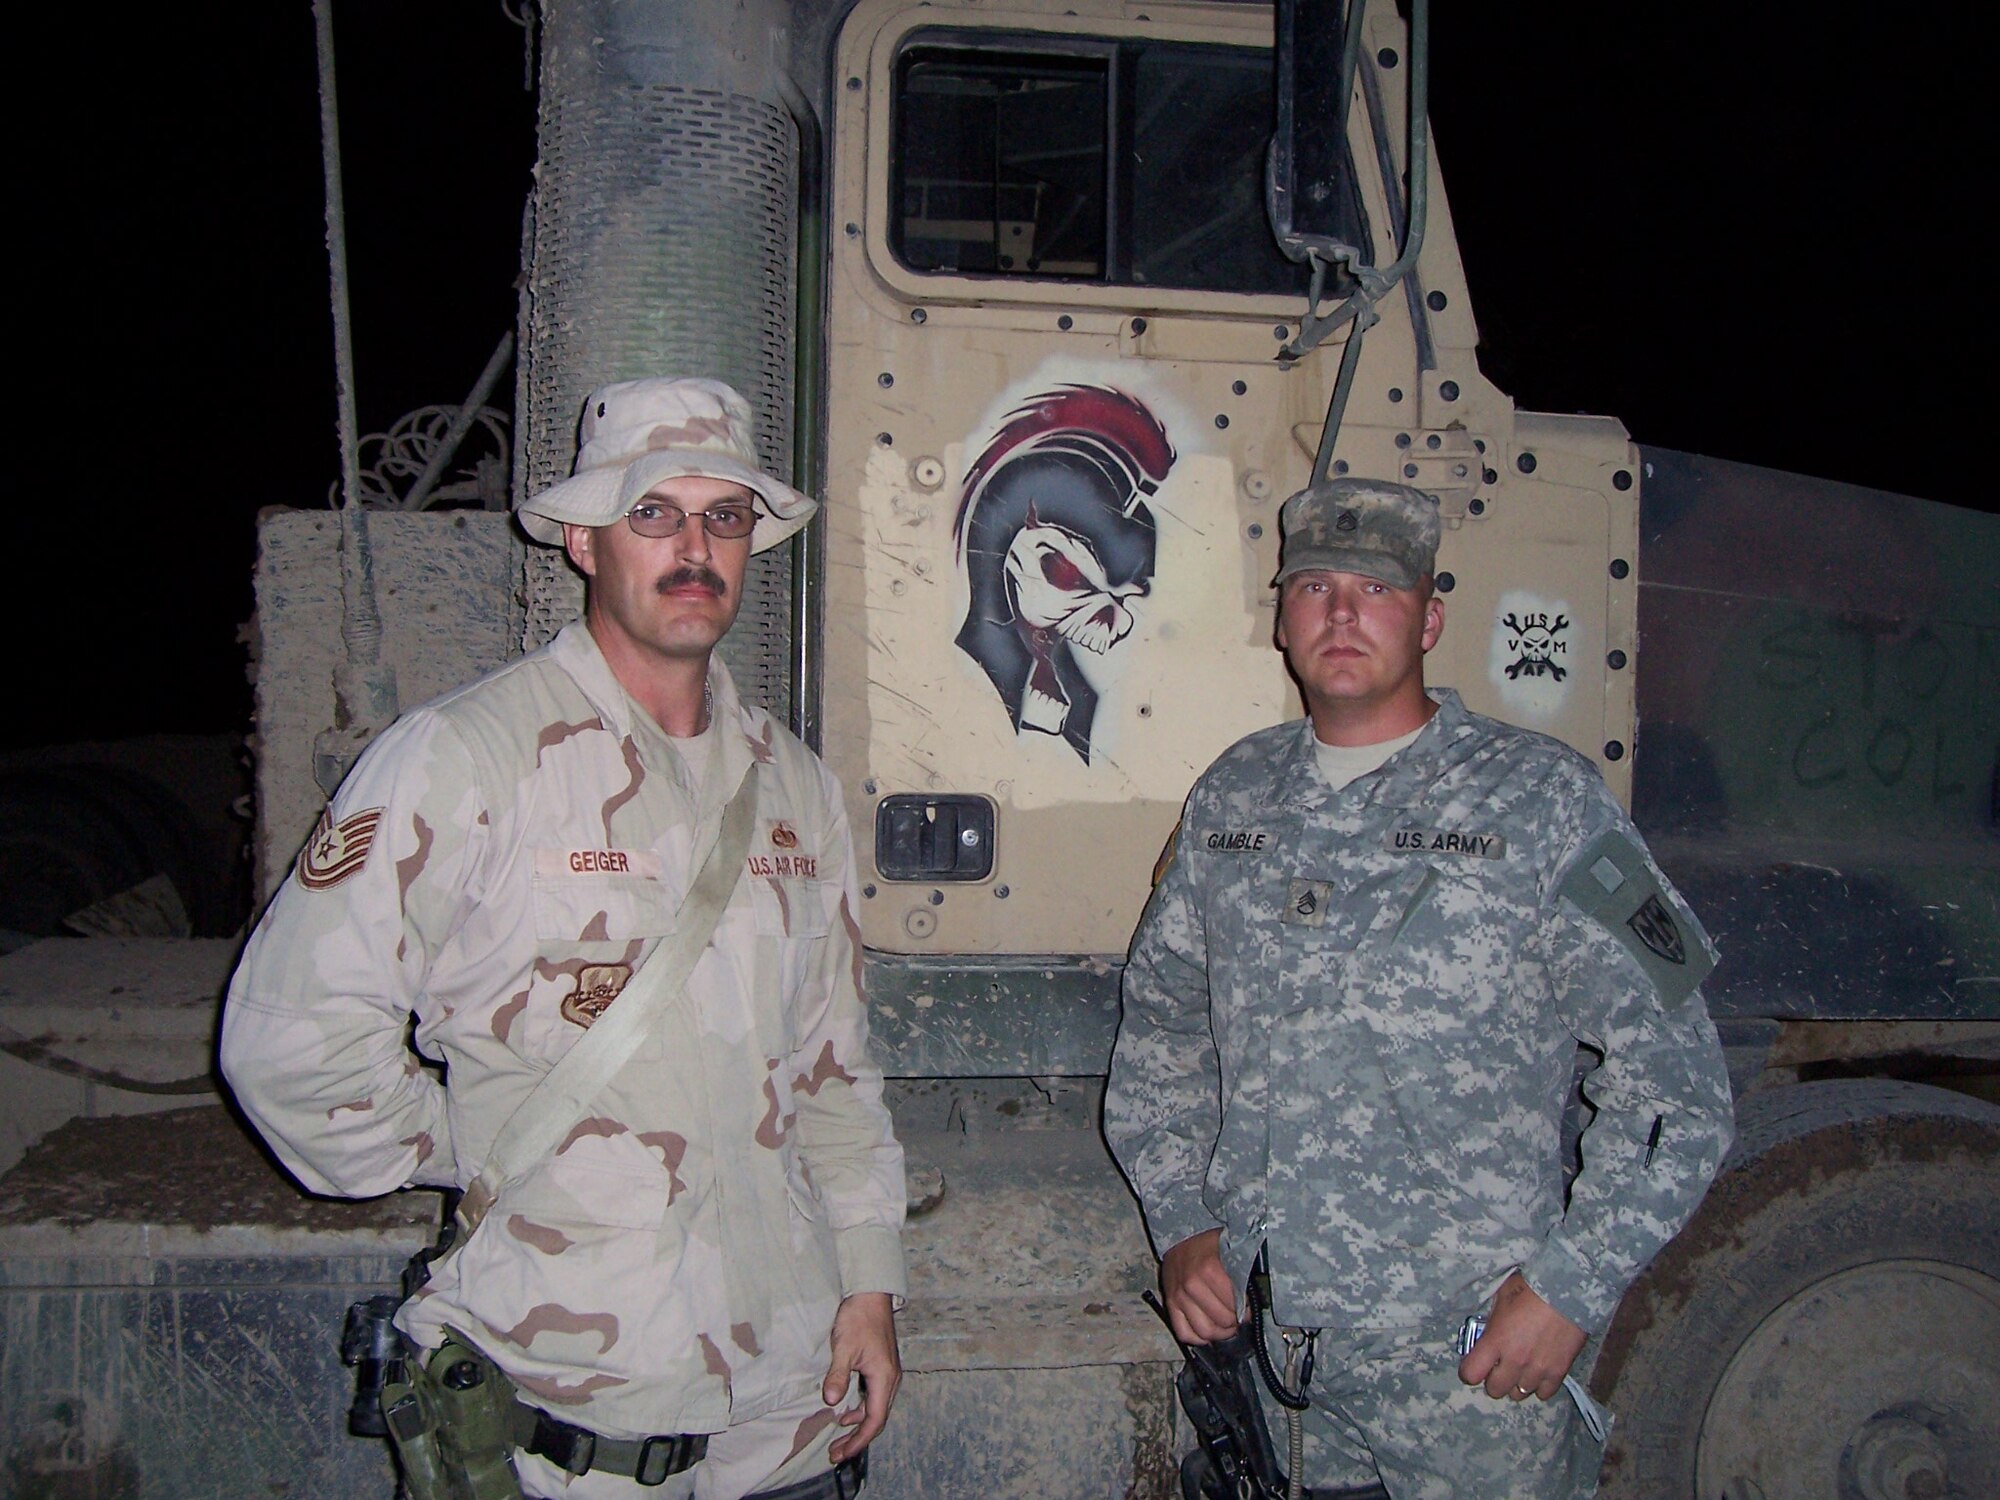 Master Sgt. William Geiger Jr., left,  and Army Sergeant 1st Class Matthew Gamble pose for a photo. Sergeant Geiger, a vehicle operations supervisor in the 78th Logistics Readiness Squadron, spent time in Iraq as a convoy commander. Courtesy photo